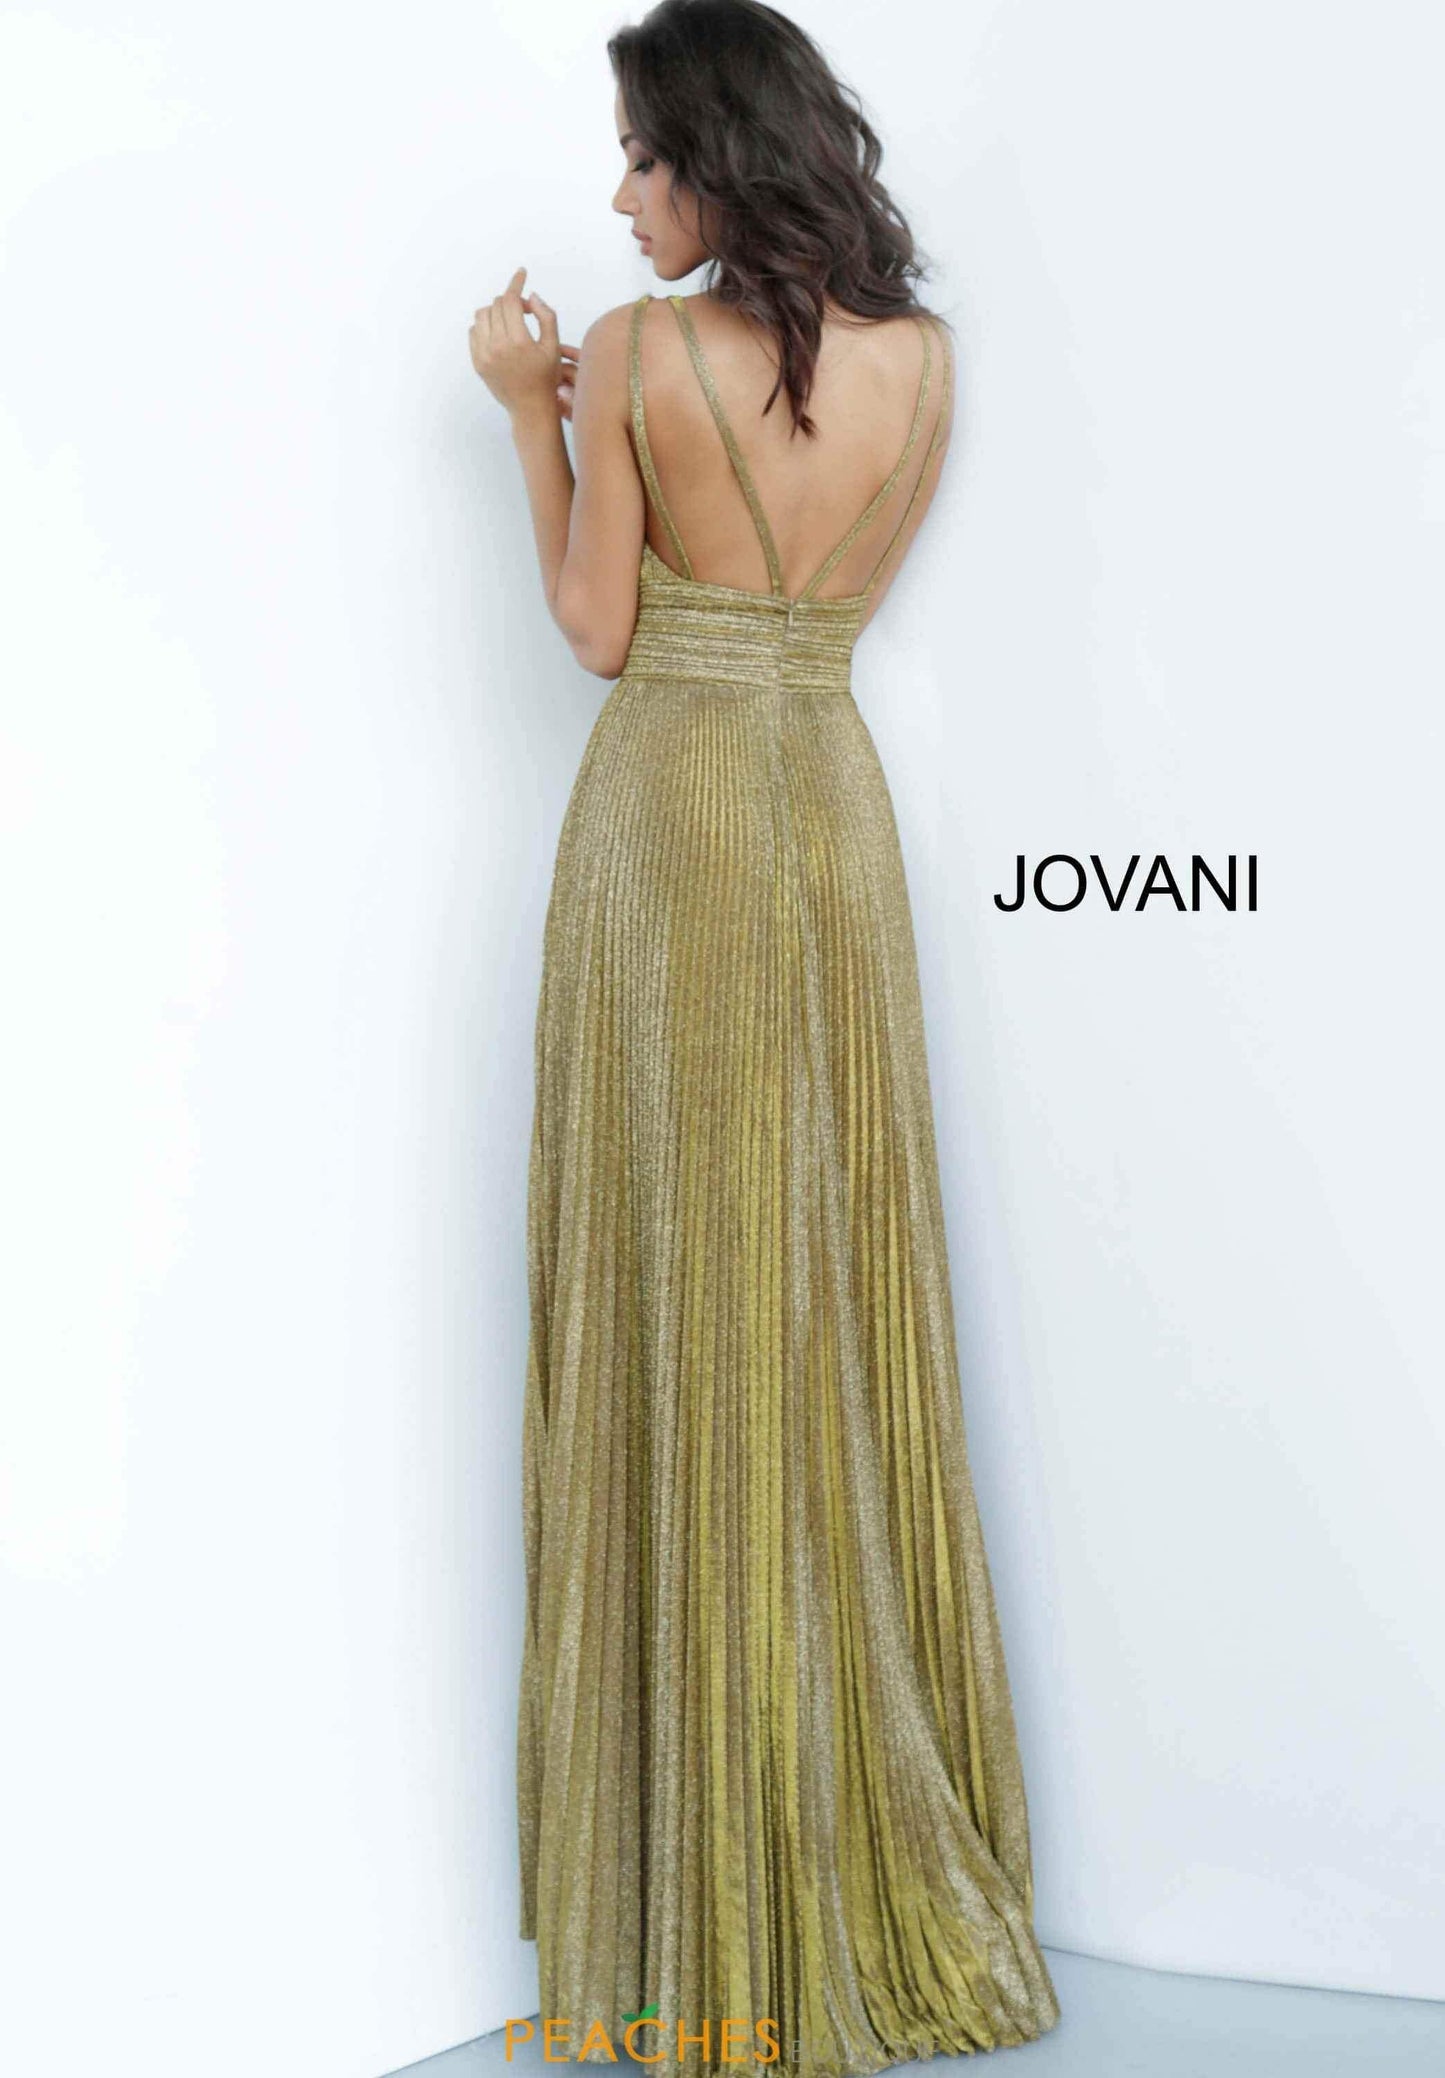 Jovani Prom Long Sleeveless Pleated Dress 2088 - The Dress Outlet